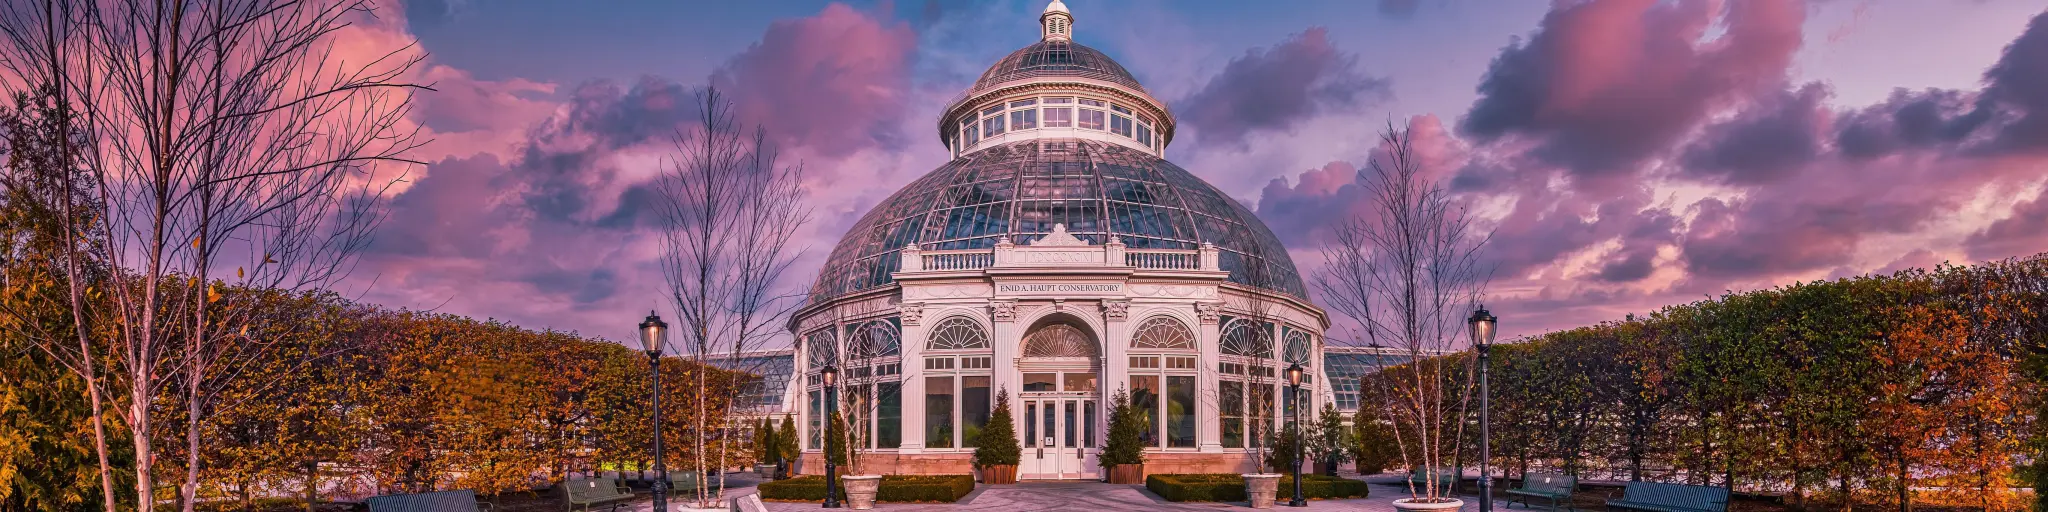 Entrance to Enid A. Haupt Conservatory building in the New York Botanical Garden